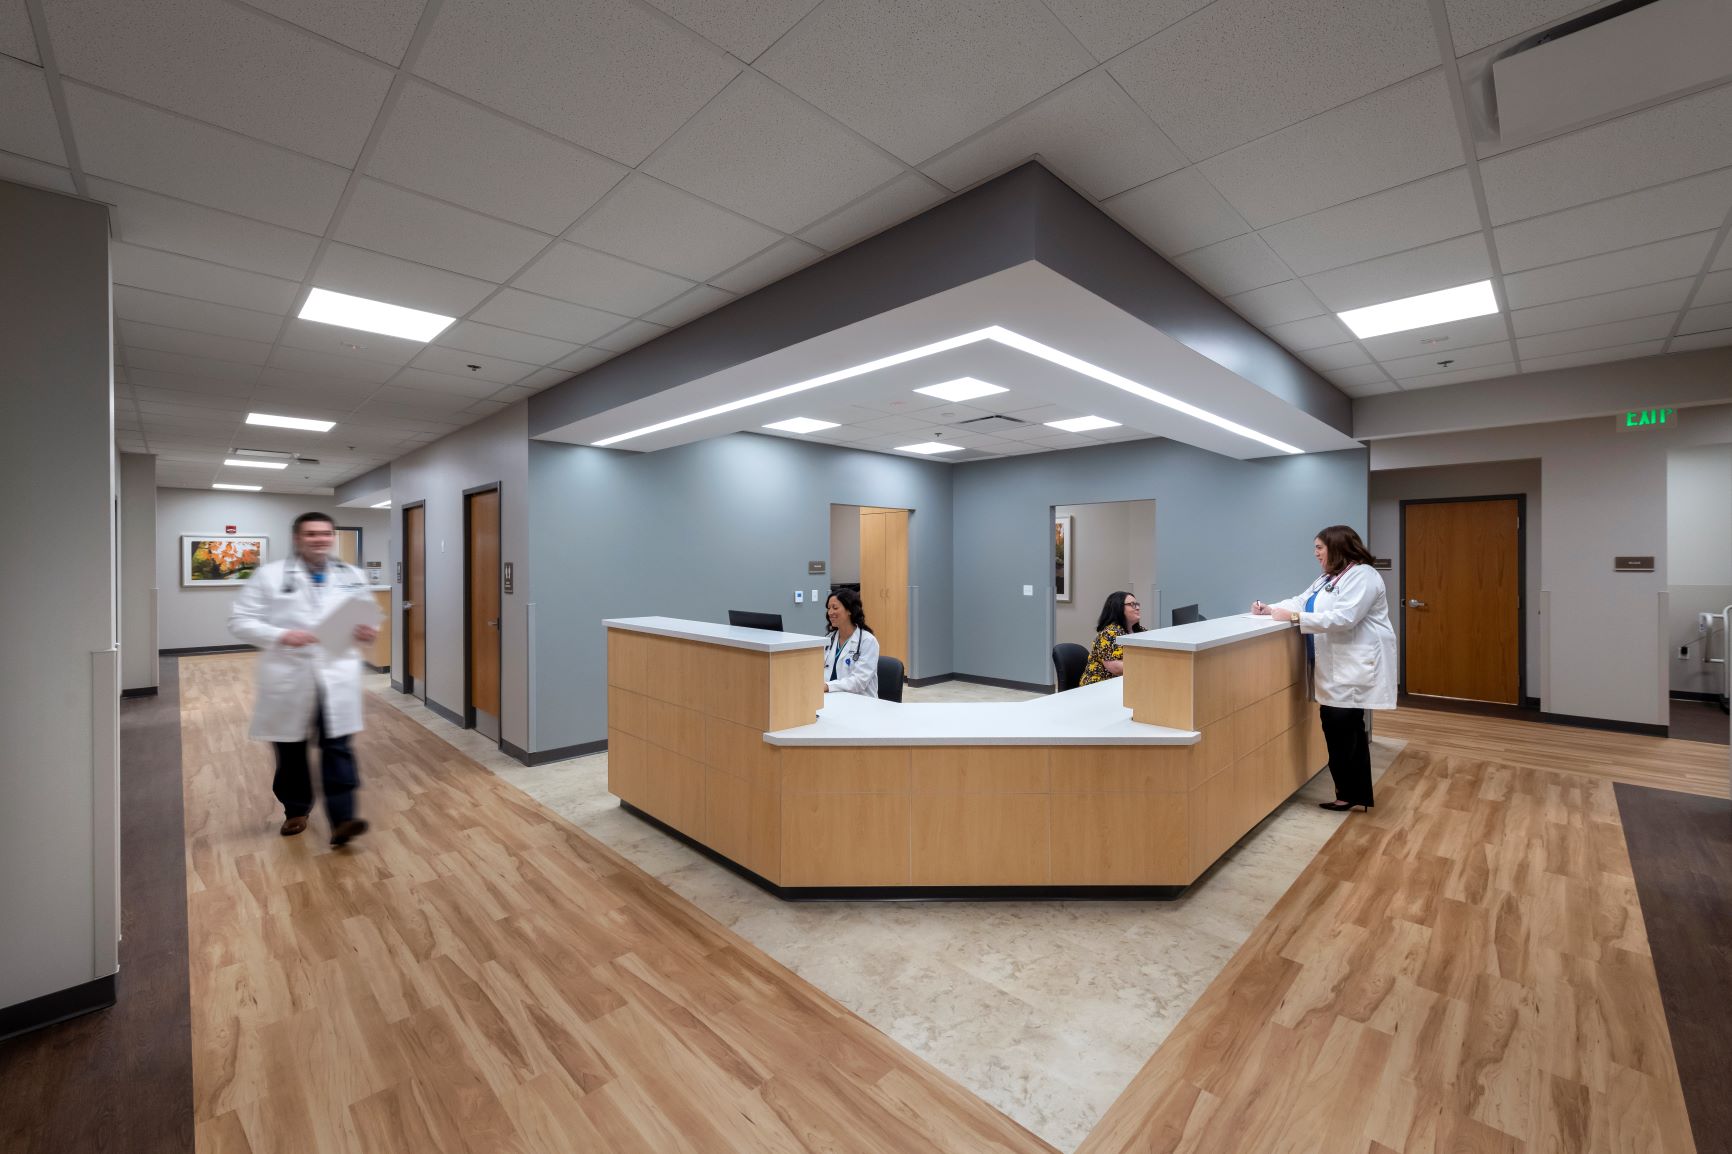 Lutheran Health Physicians Suite 200 Nurse Station with people walking and interacting